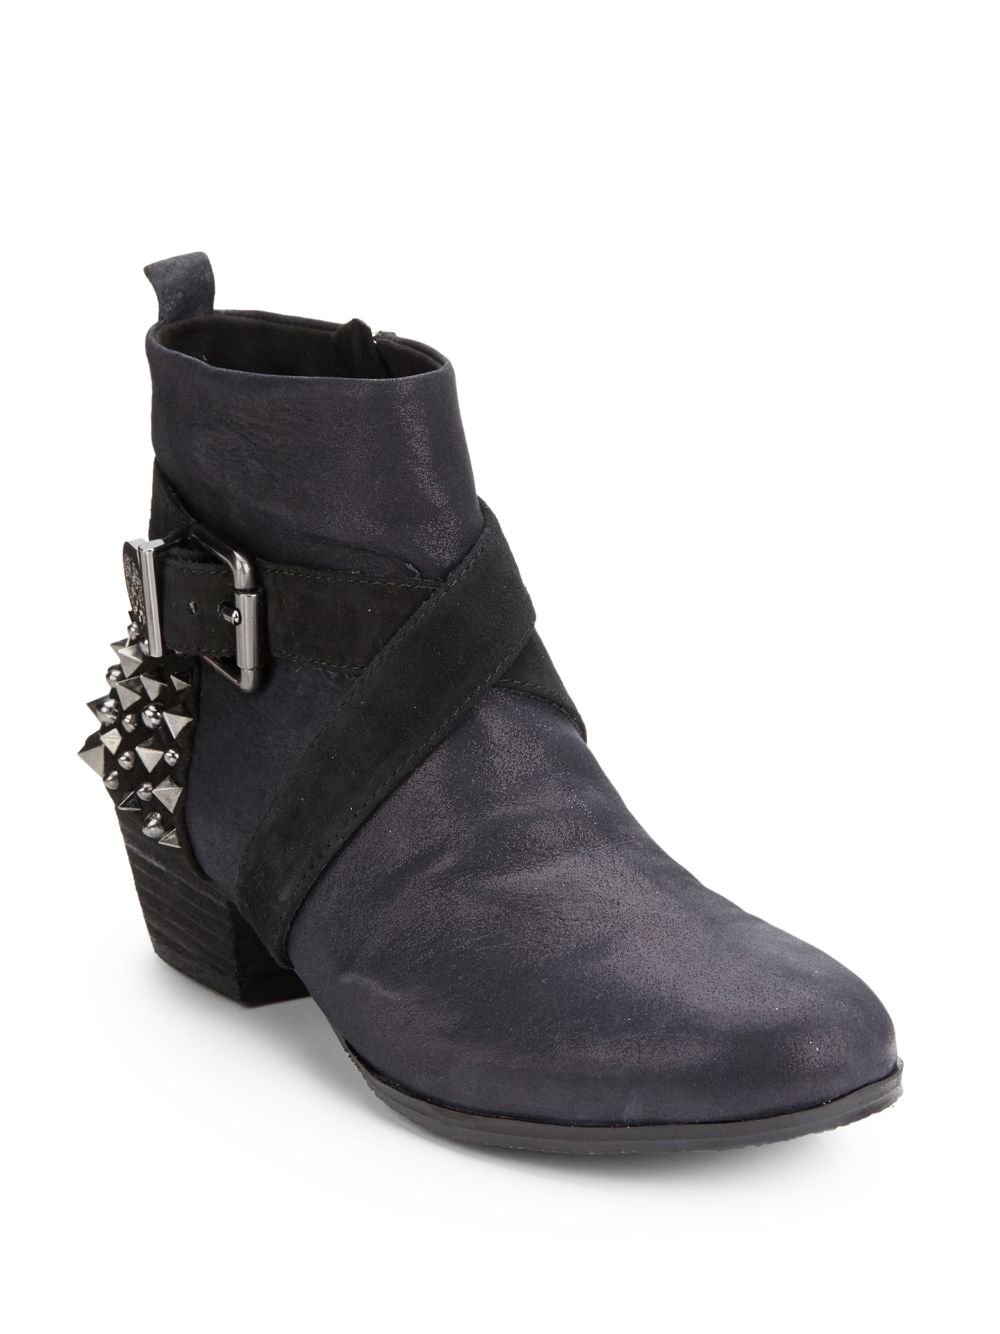 Vince Camuto Marcin Studded Ankle Boots in Gray (grey black) | Lyst